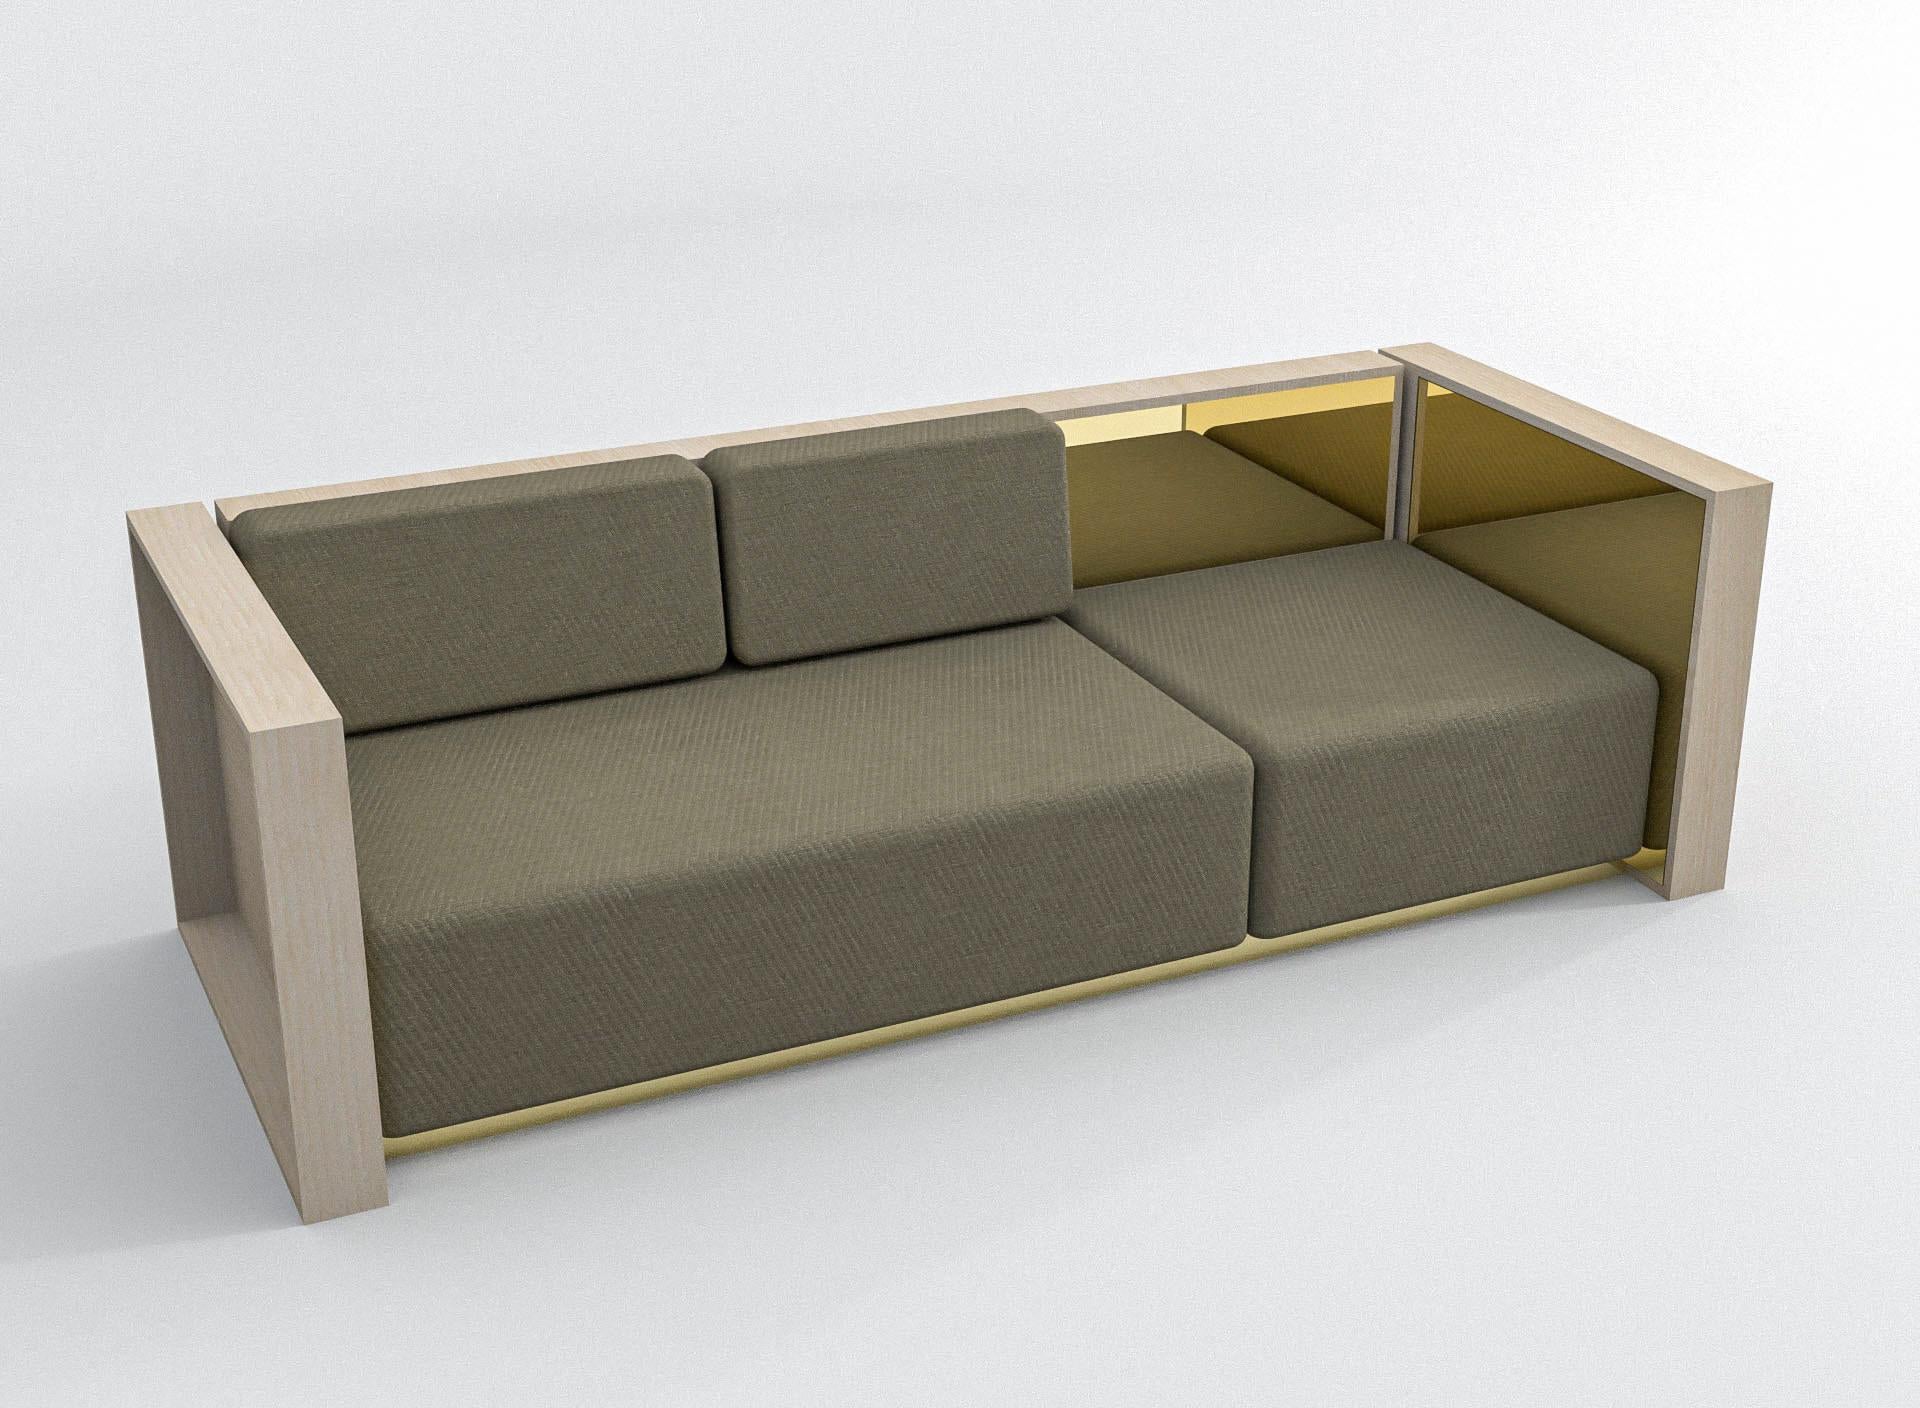 barh sofa in natural ash wood, brass details and brown upholstery - 3 seater In New Condition For Sale In Antwerp, Antwerp